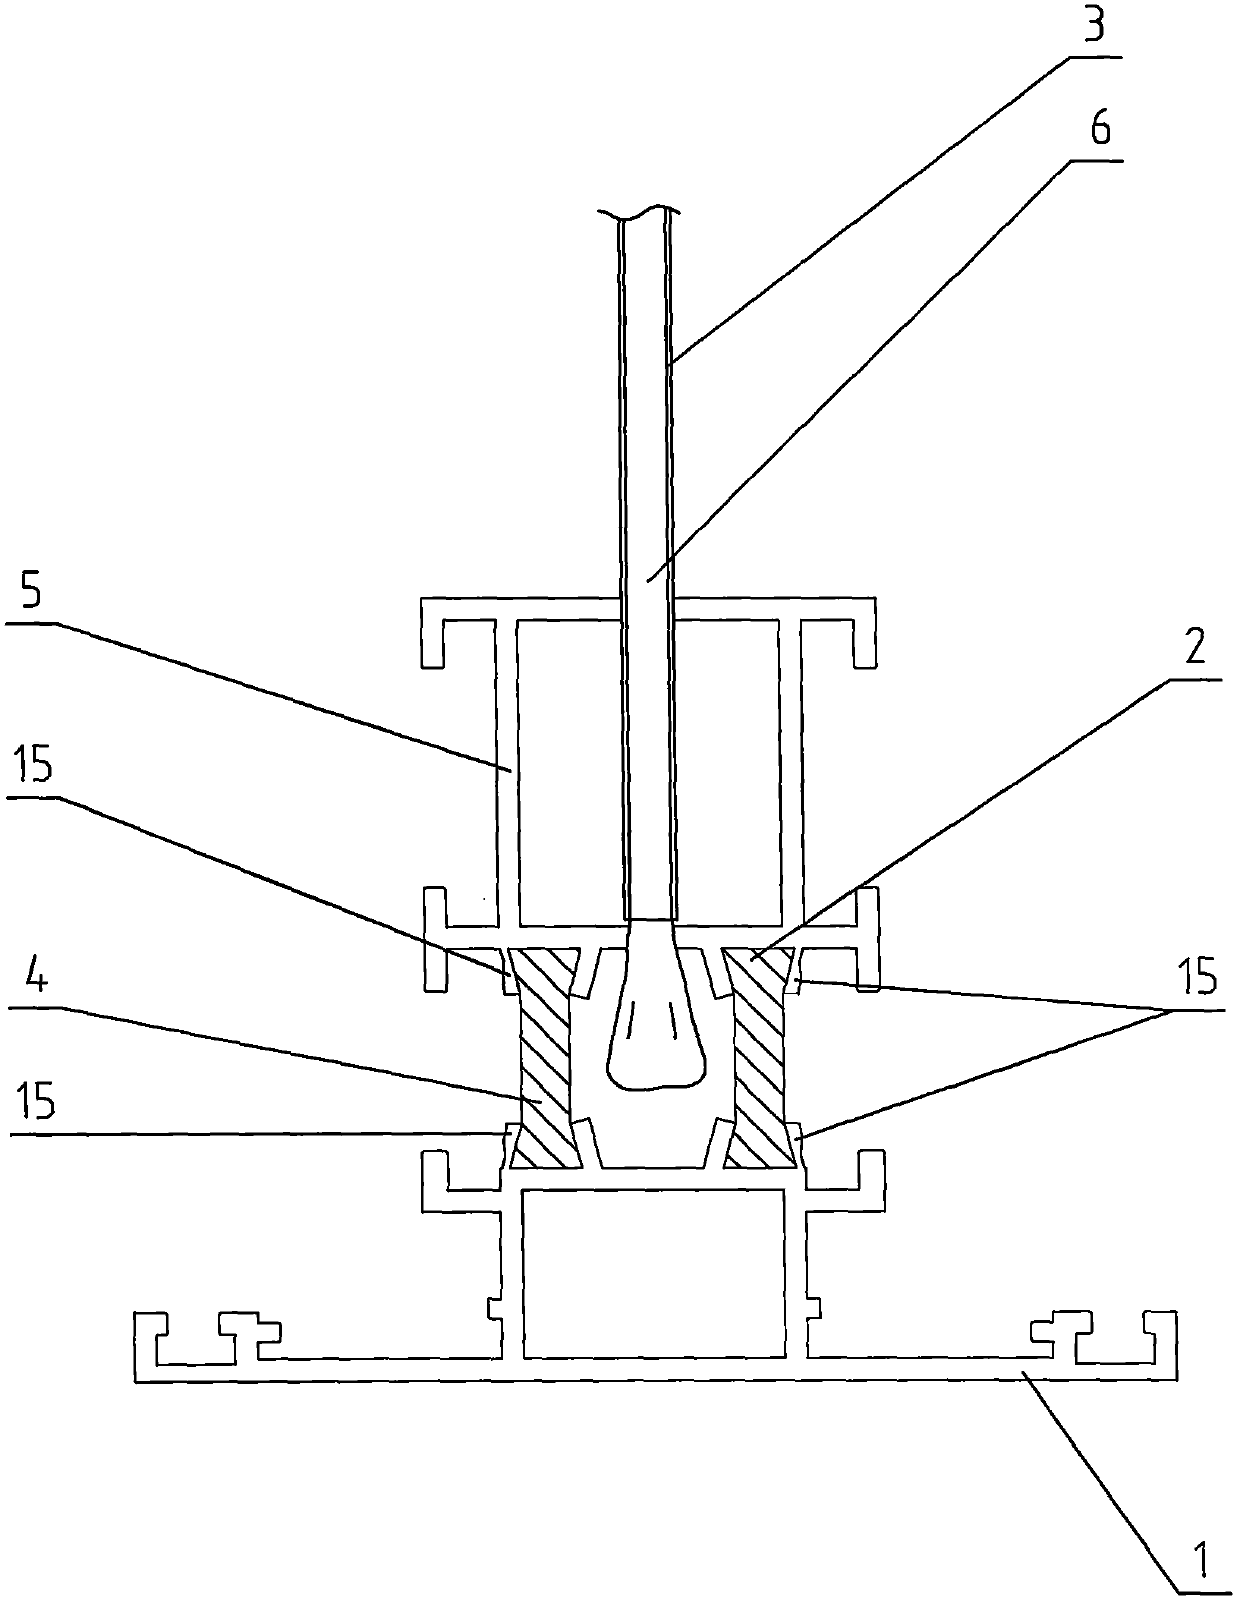 A method and equipment for forming polyurethane foamed metal profiles in inner cavity by threading method